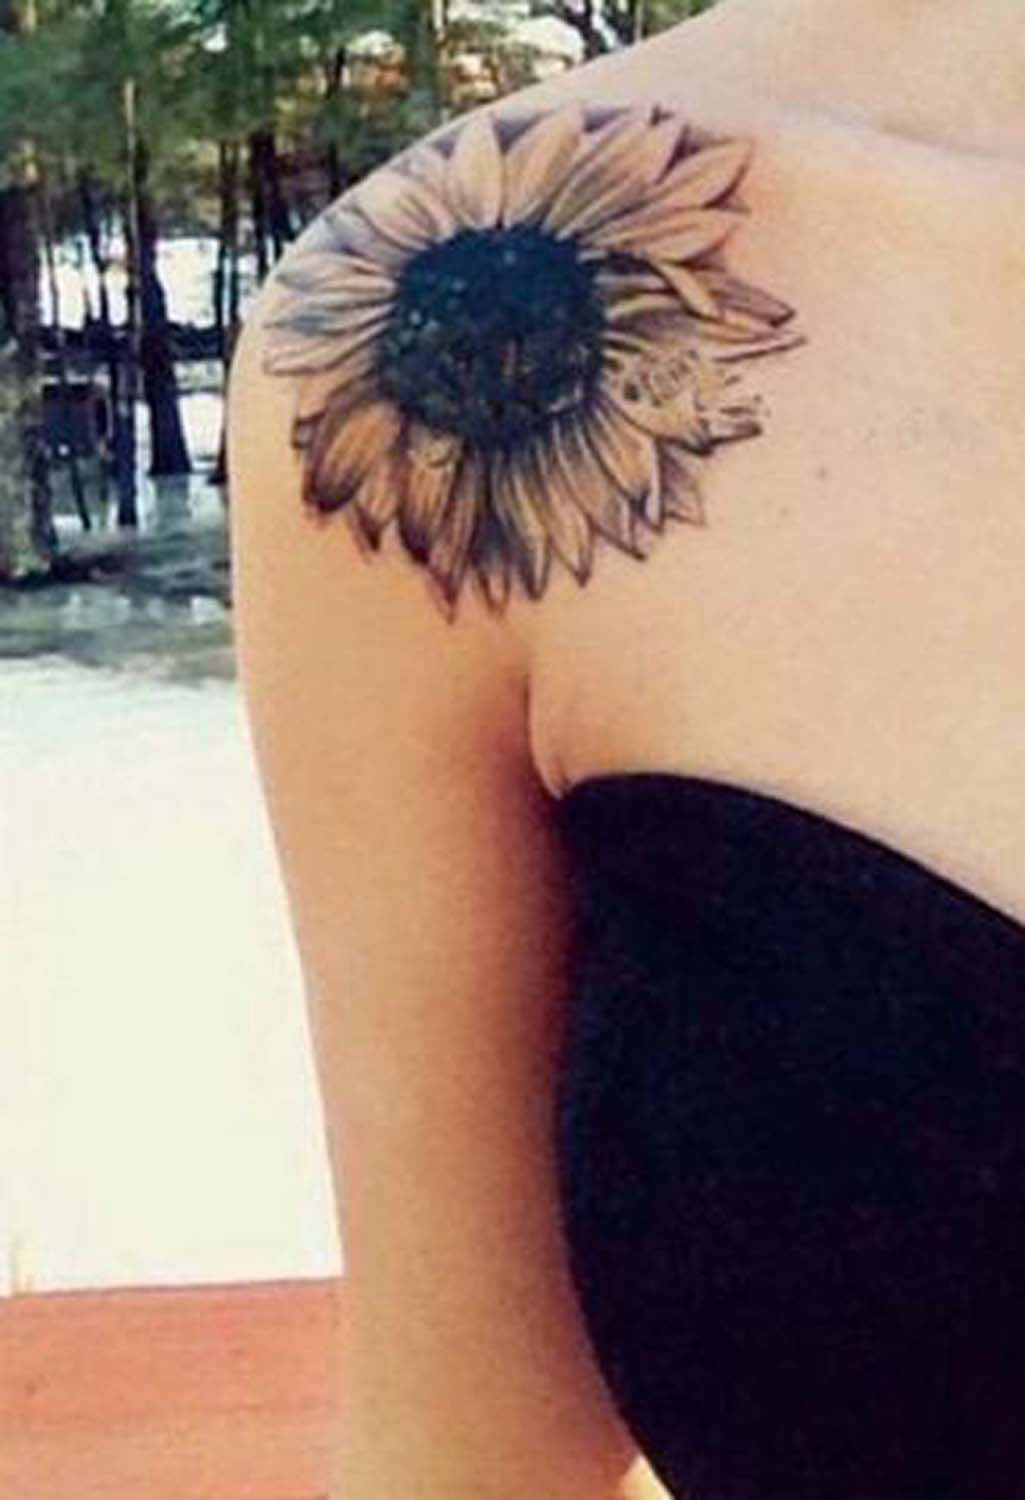 144 Sunflower Tattoos That Will Brighten Up Your Life